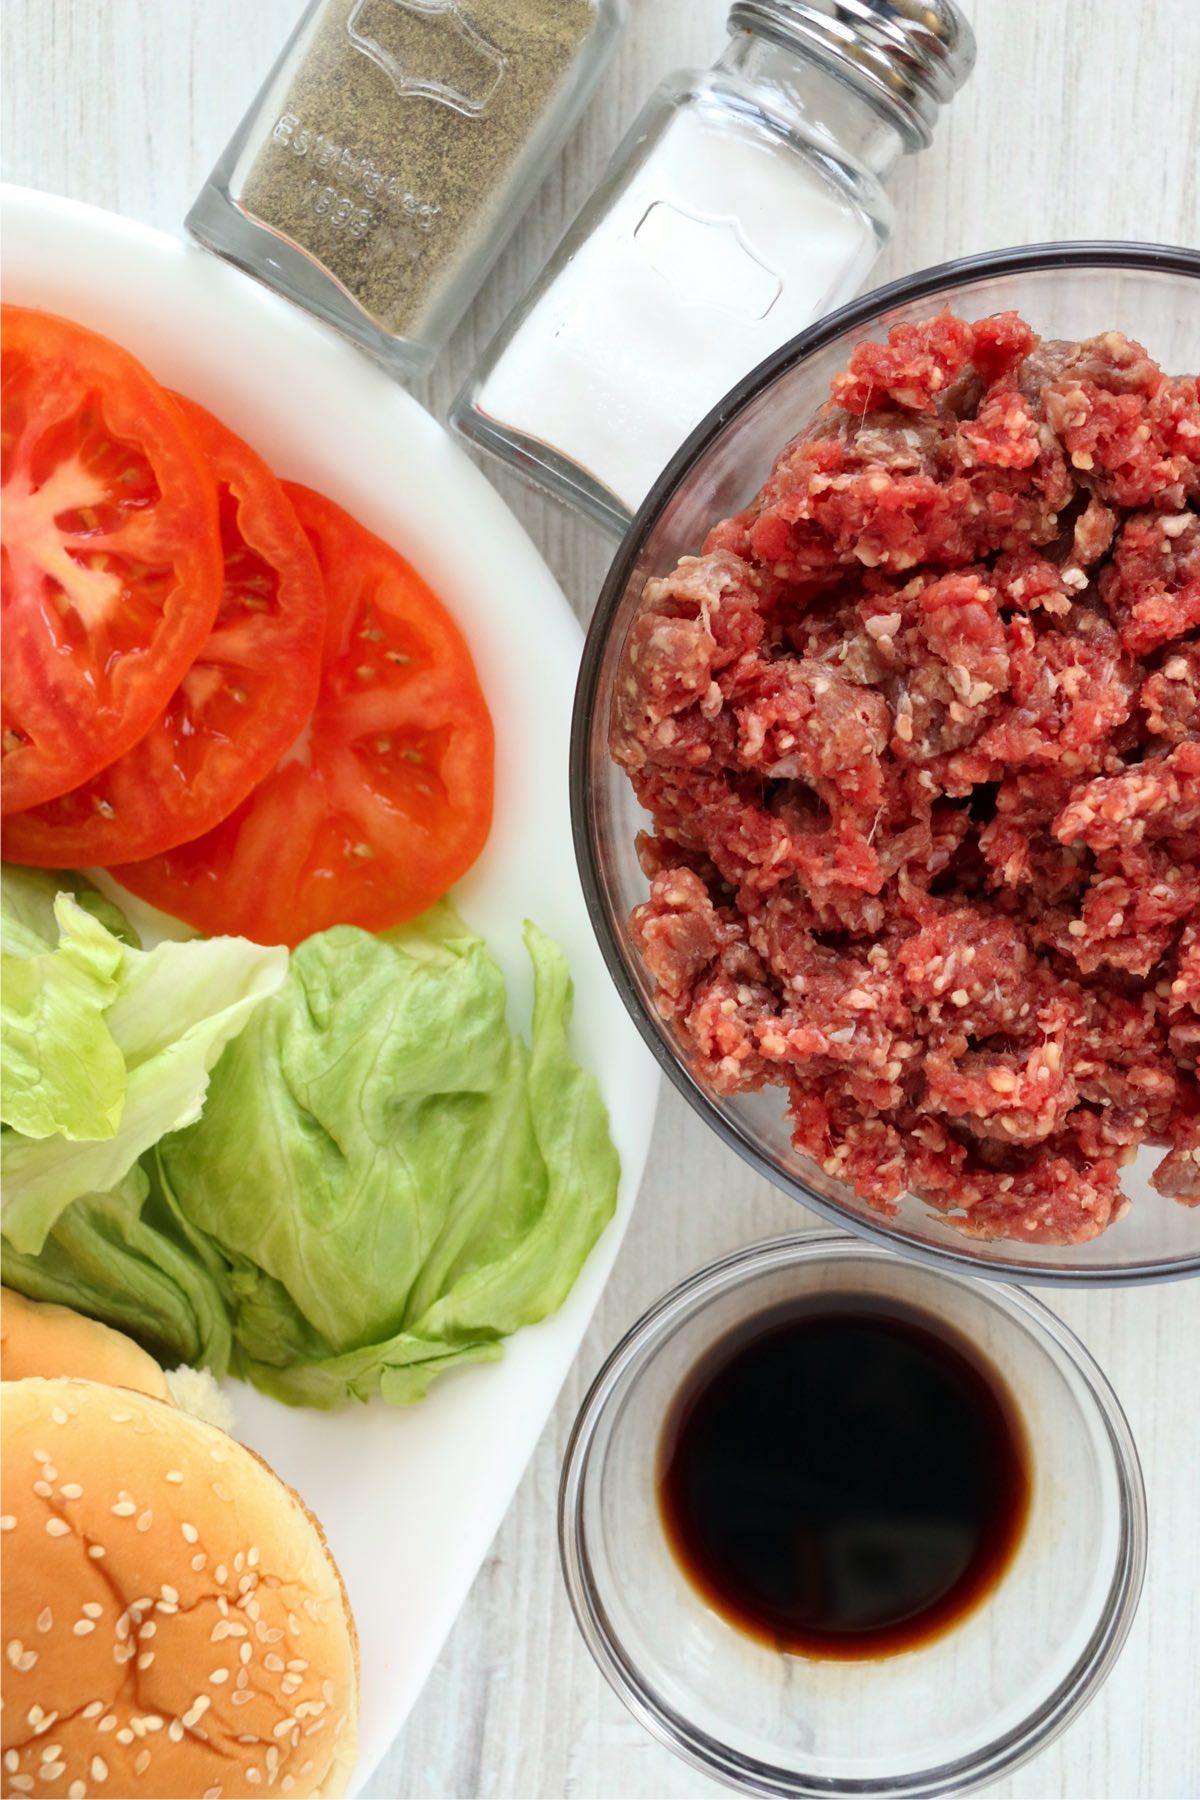 Overhead shot of ground beef in bowl next to buns, lettuce, and tomato on plate